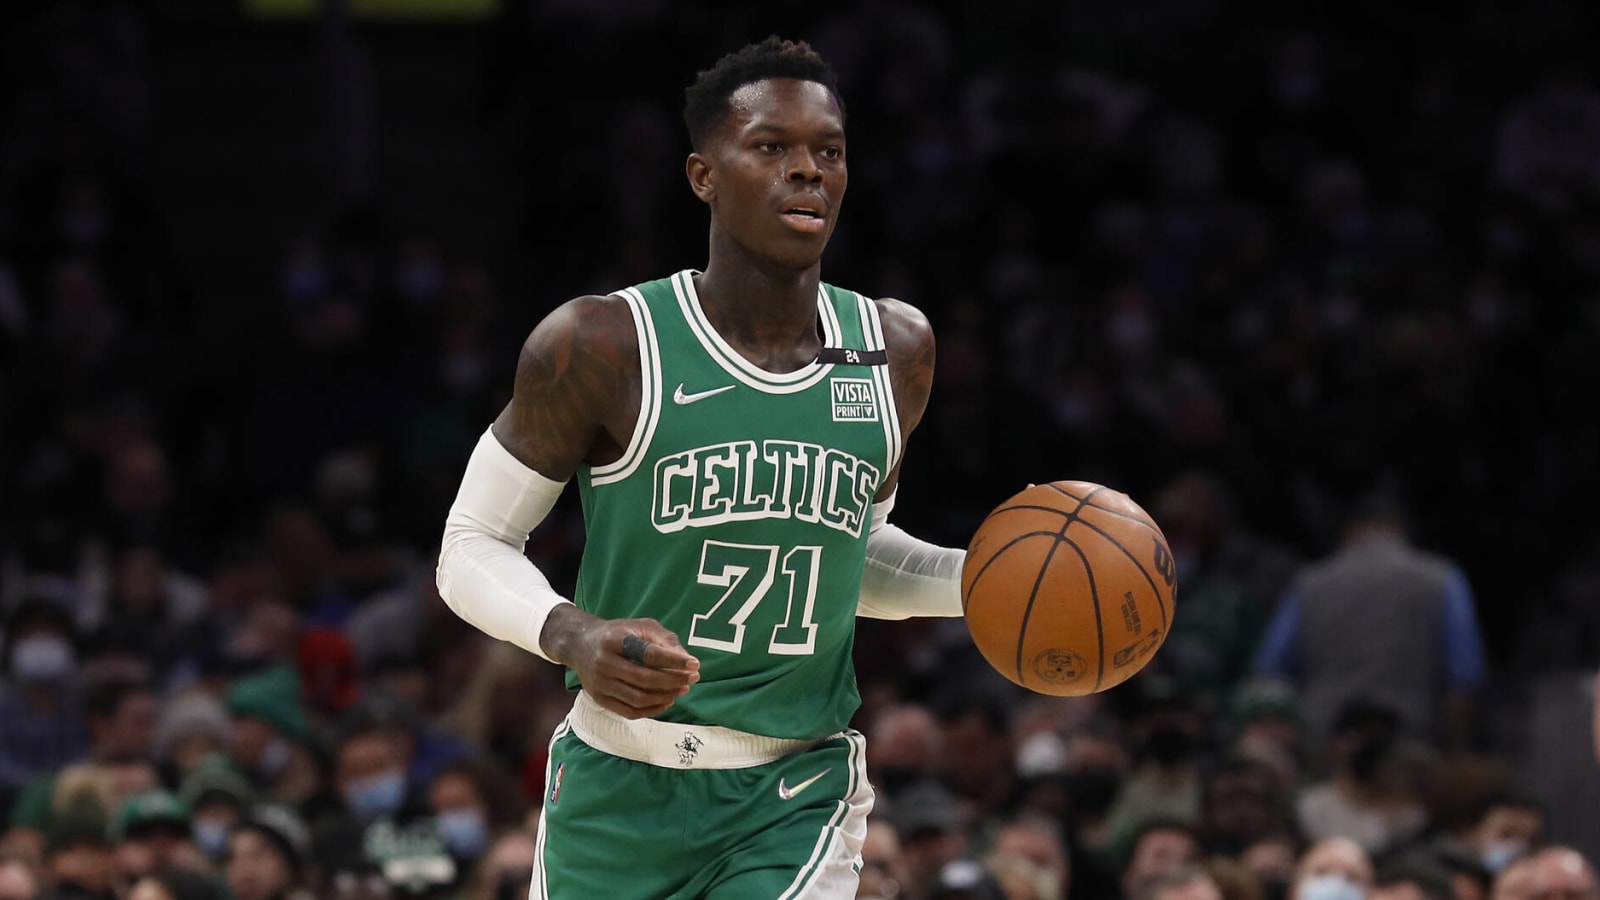 Celtics reportedly offered Schroder to Bucks for DiVincenzo